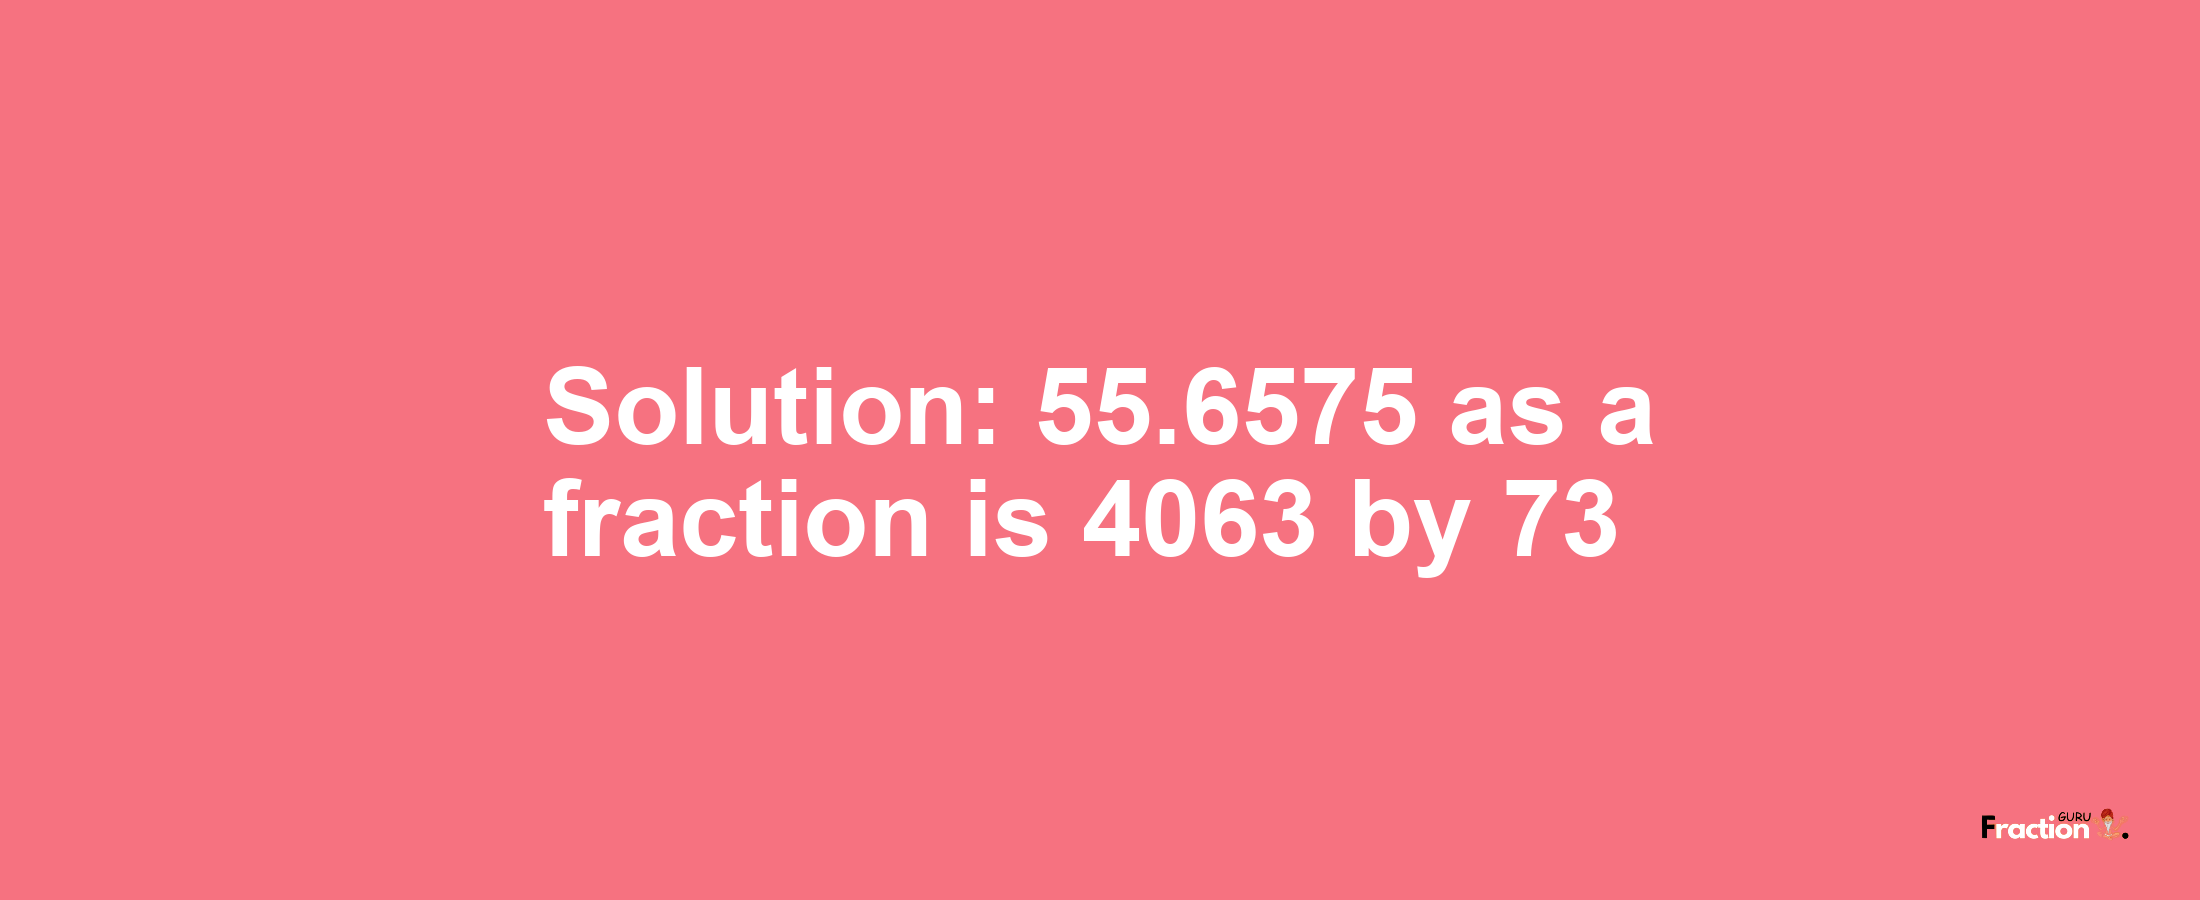 Solution:55.6575 as a fraction is 4063/73